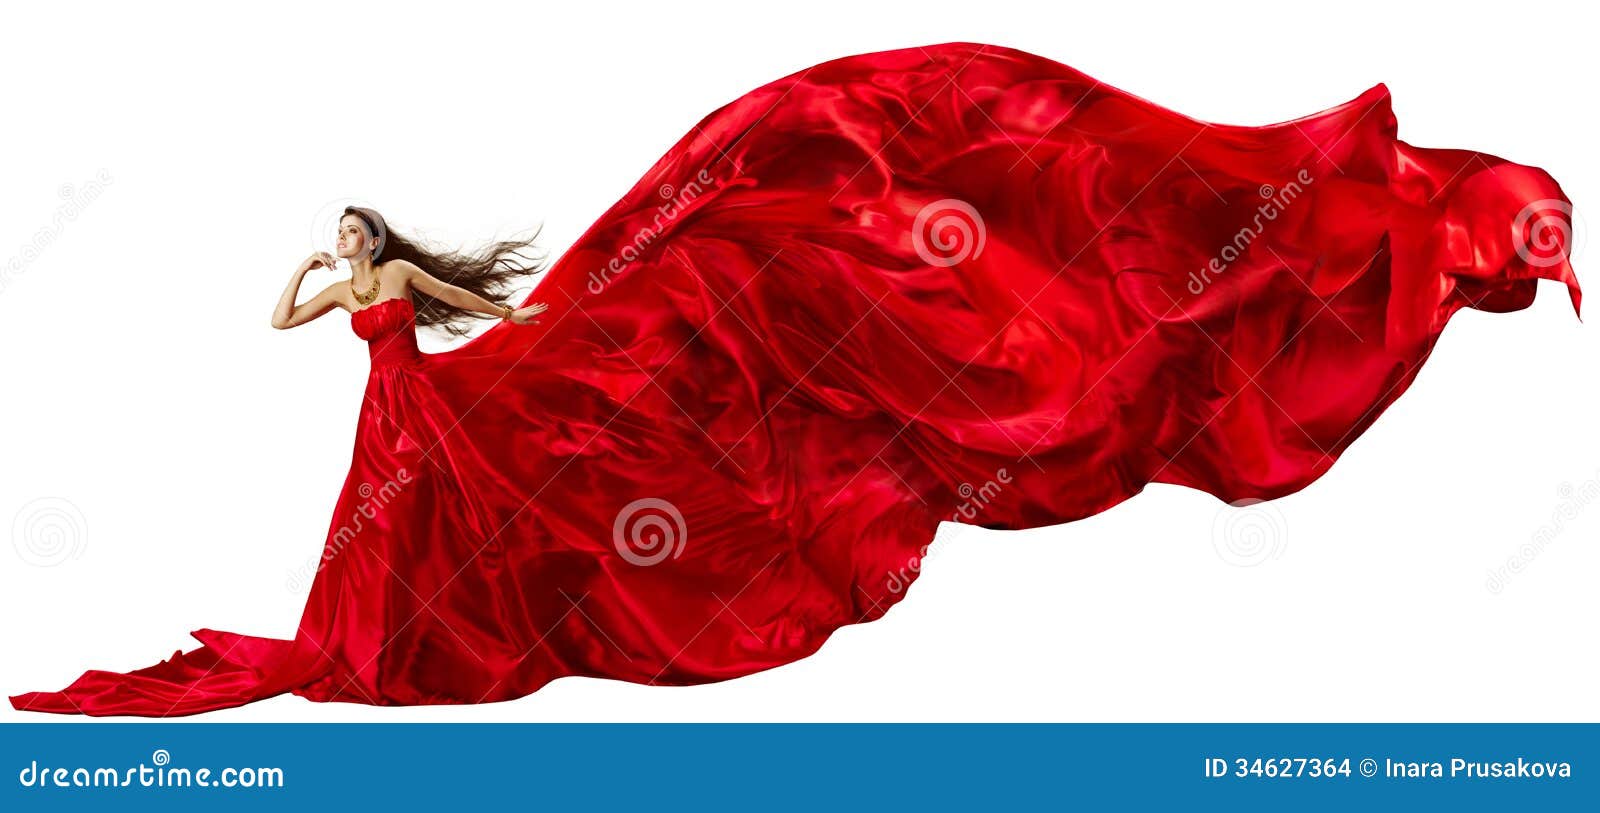 woman red dress, flying fabric silk cloth waving fluttering on wind